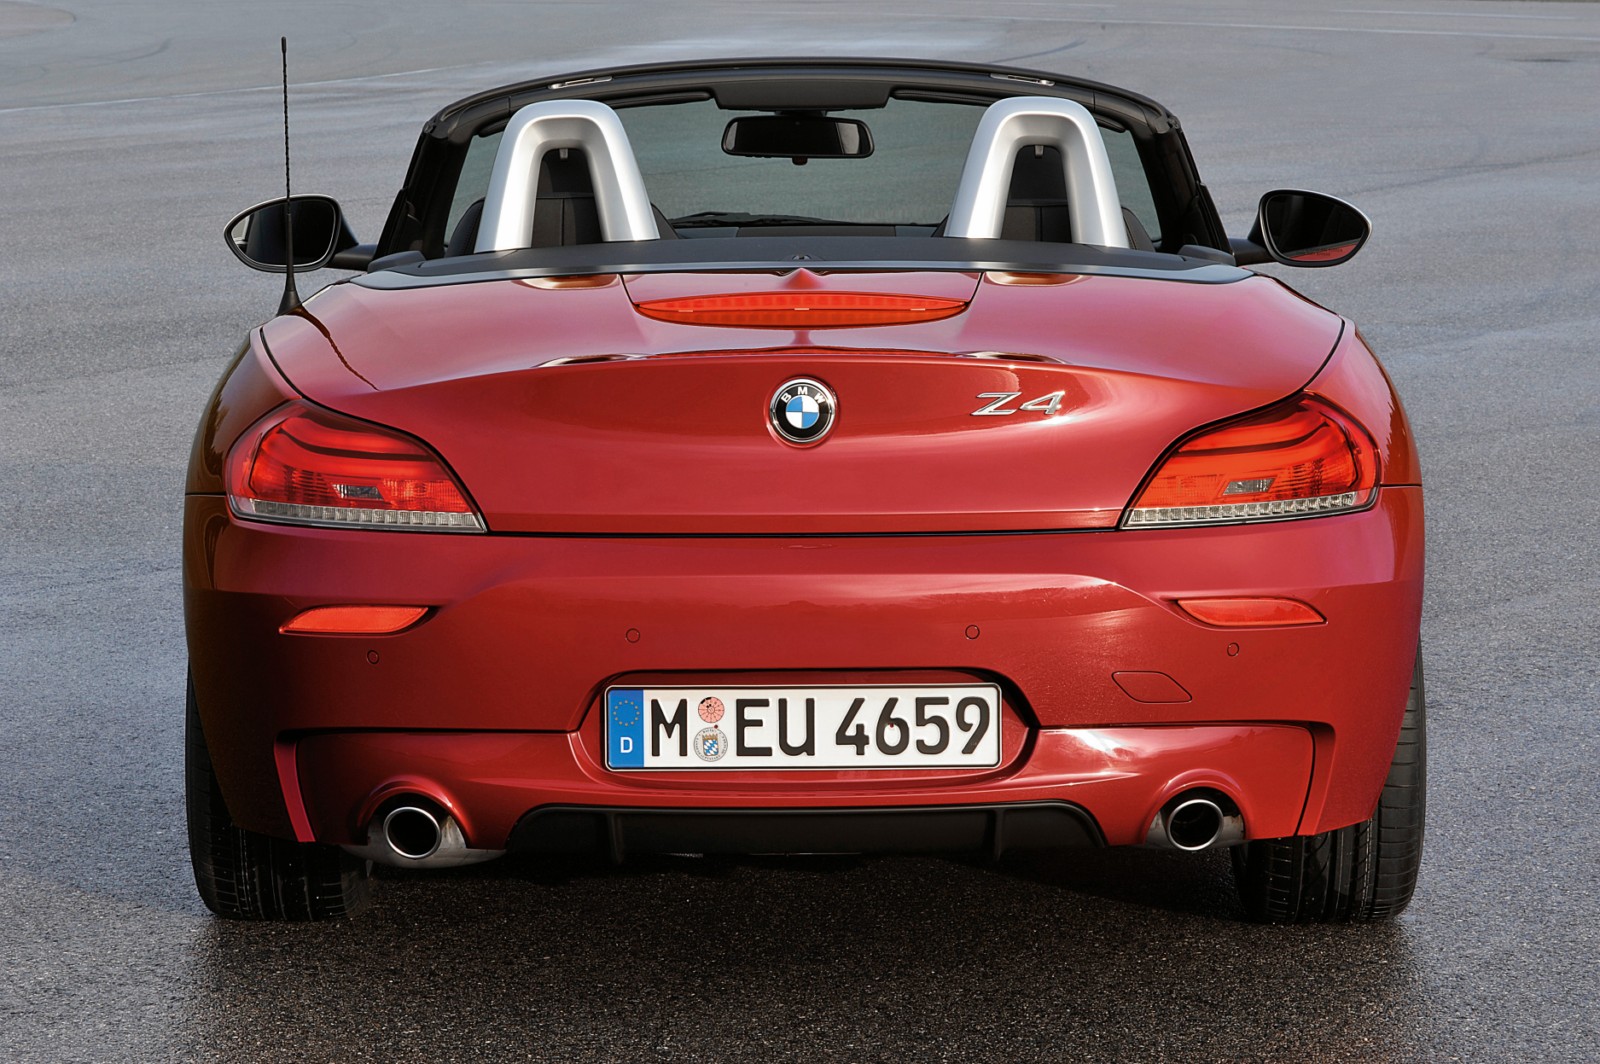 View Download Wallpaper. 1600x1063. Comments. BMW Z4 sDrive 35is